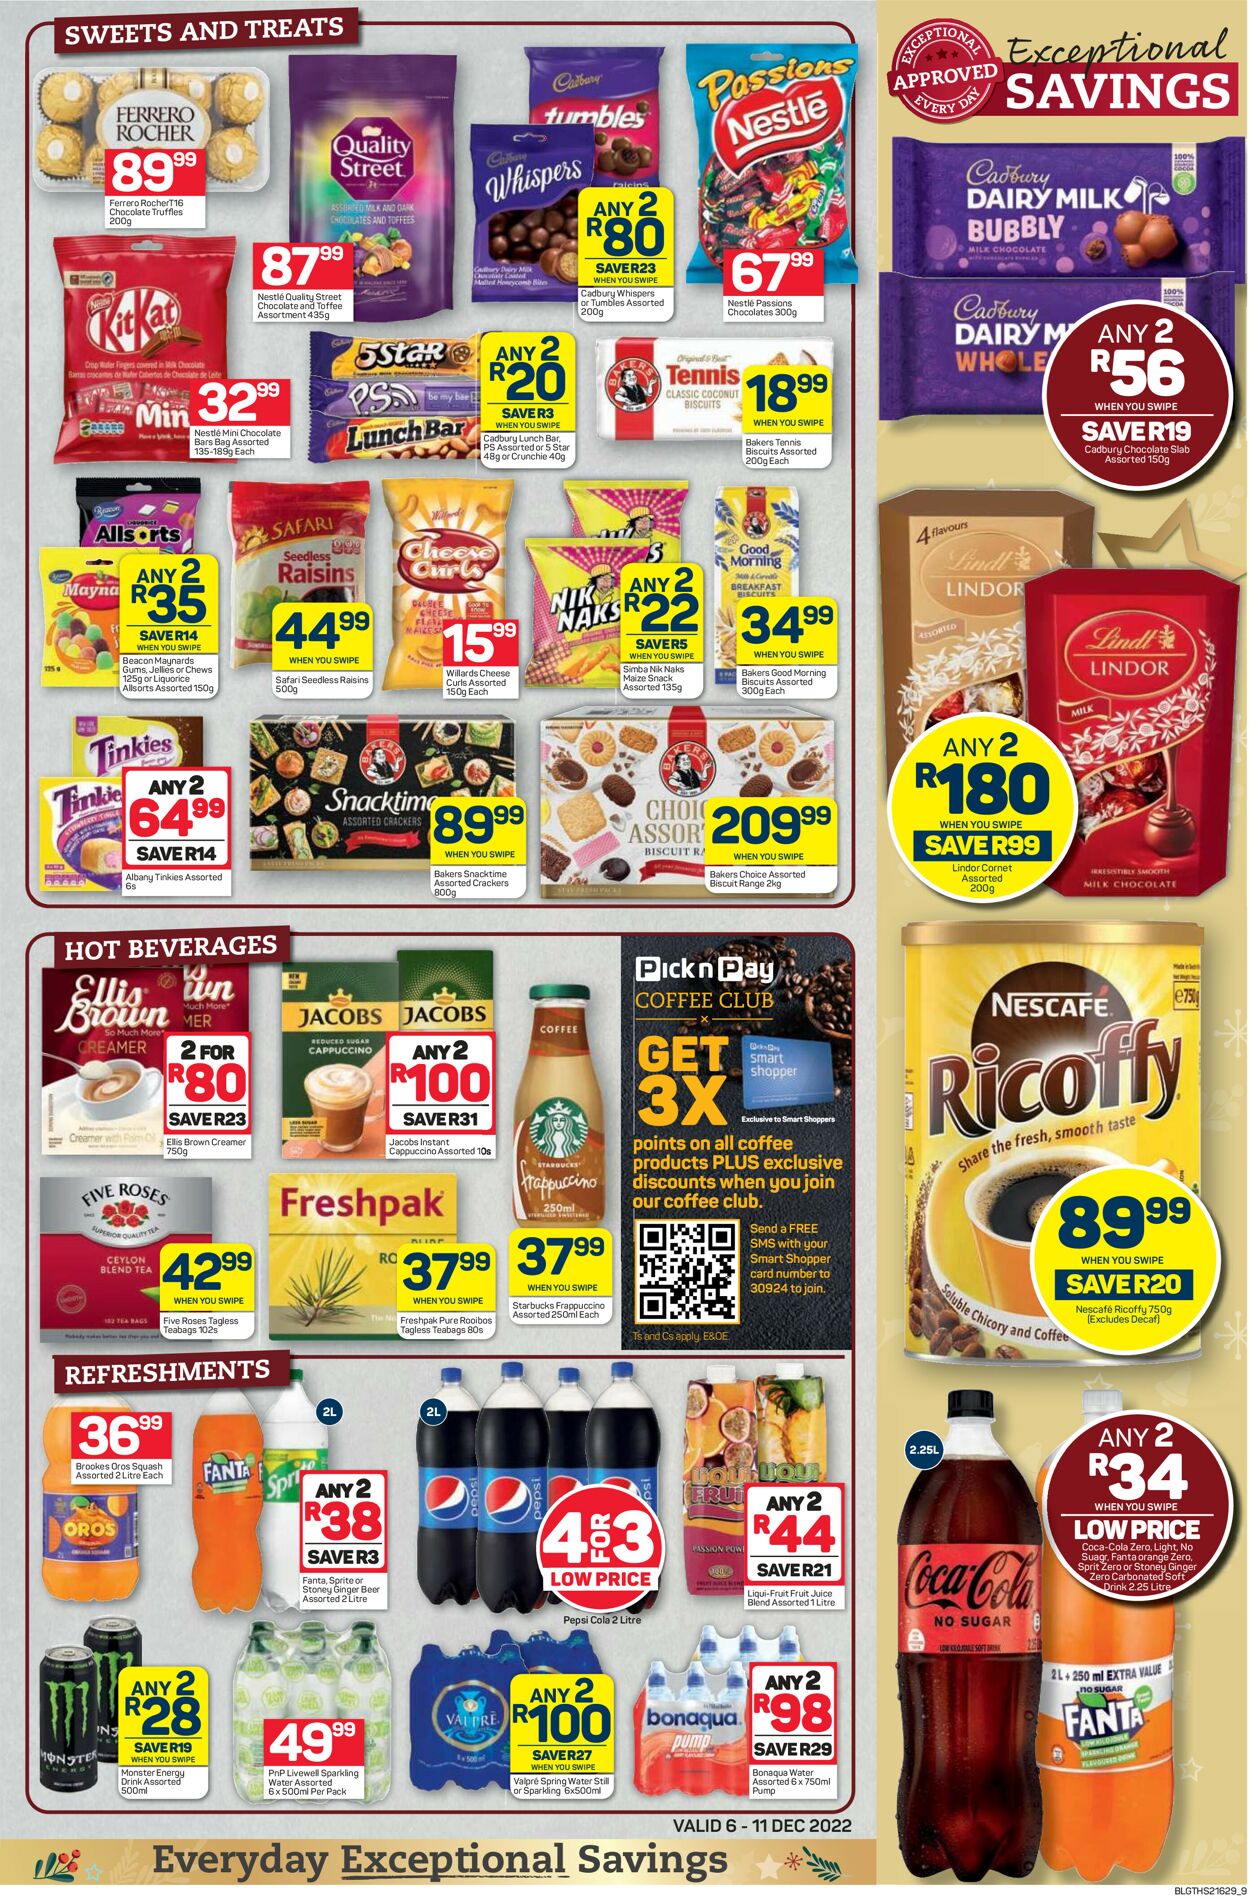 Pick n Pay Catalogue - 2022/12/06-2022/12/11 (Page 9)